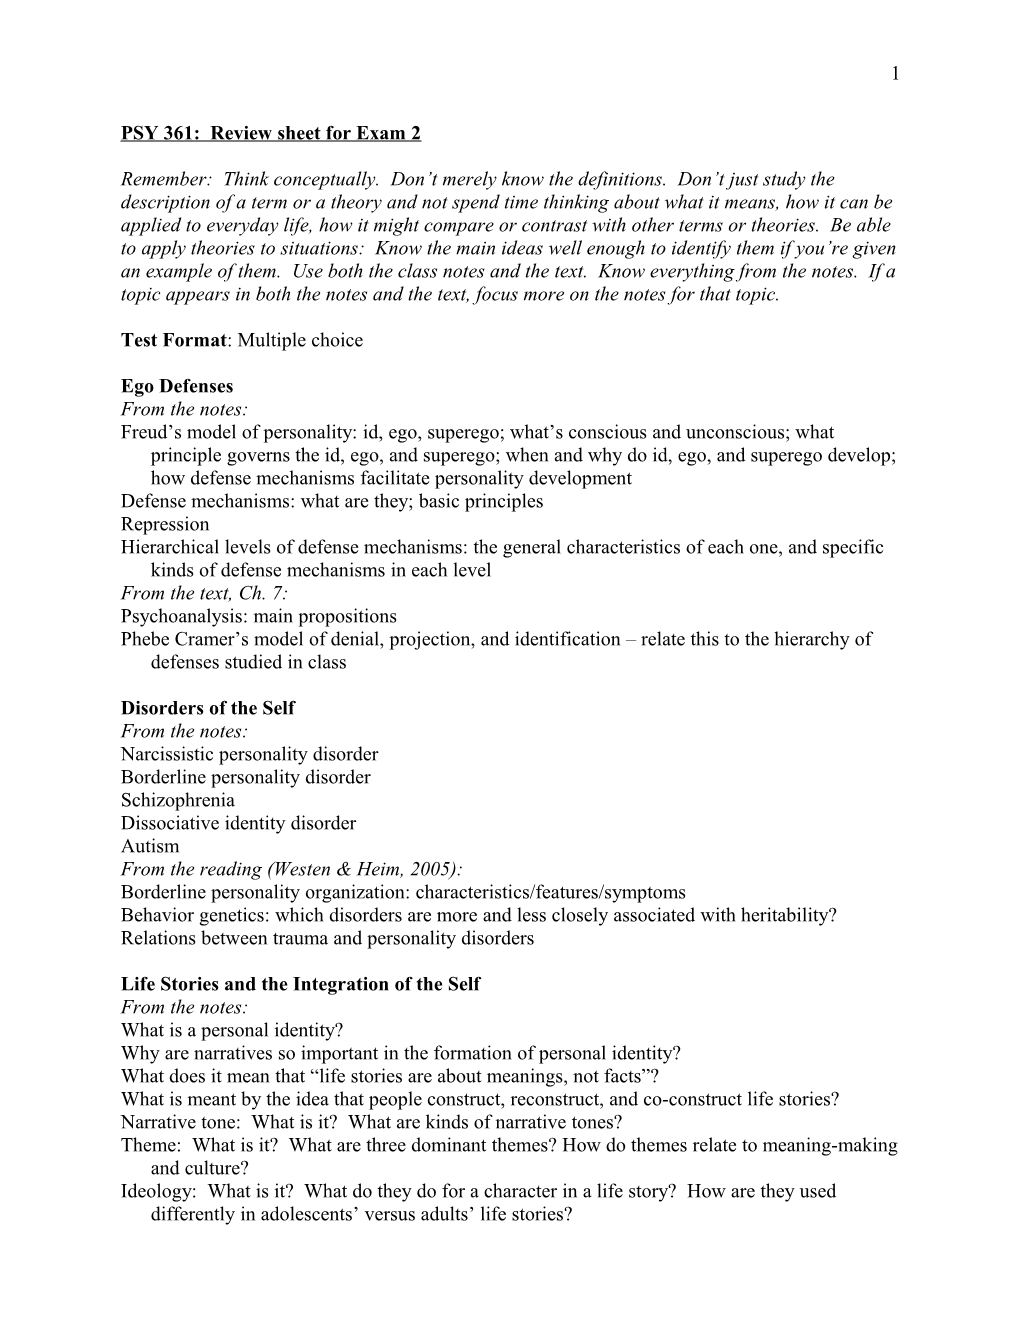 PSY 361: Review Sheet for Exam 1